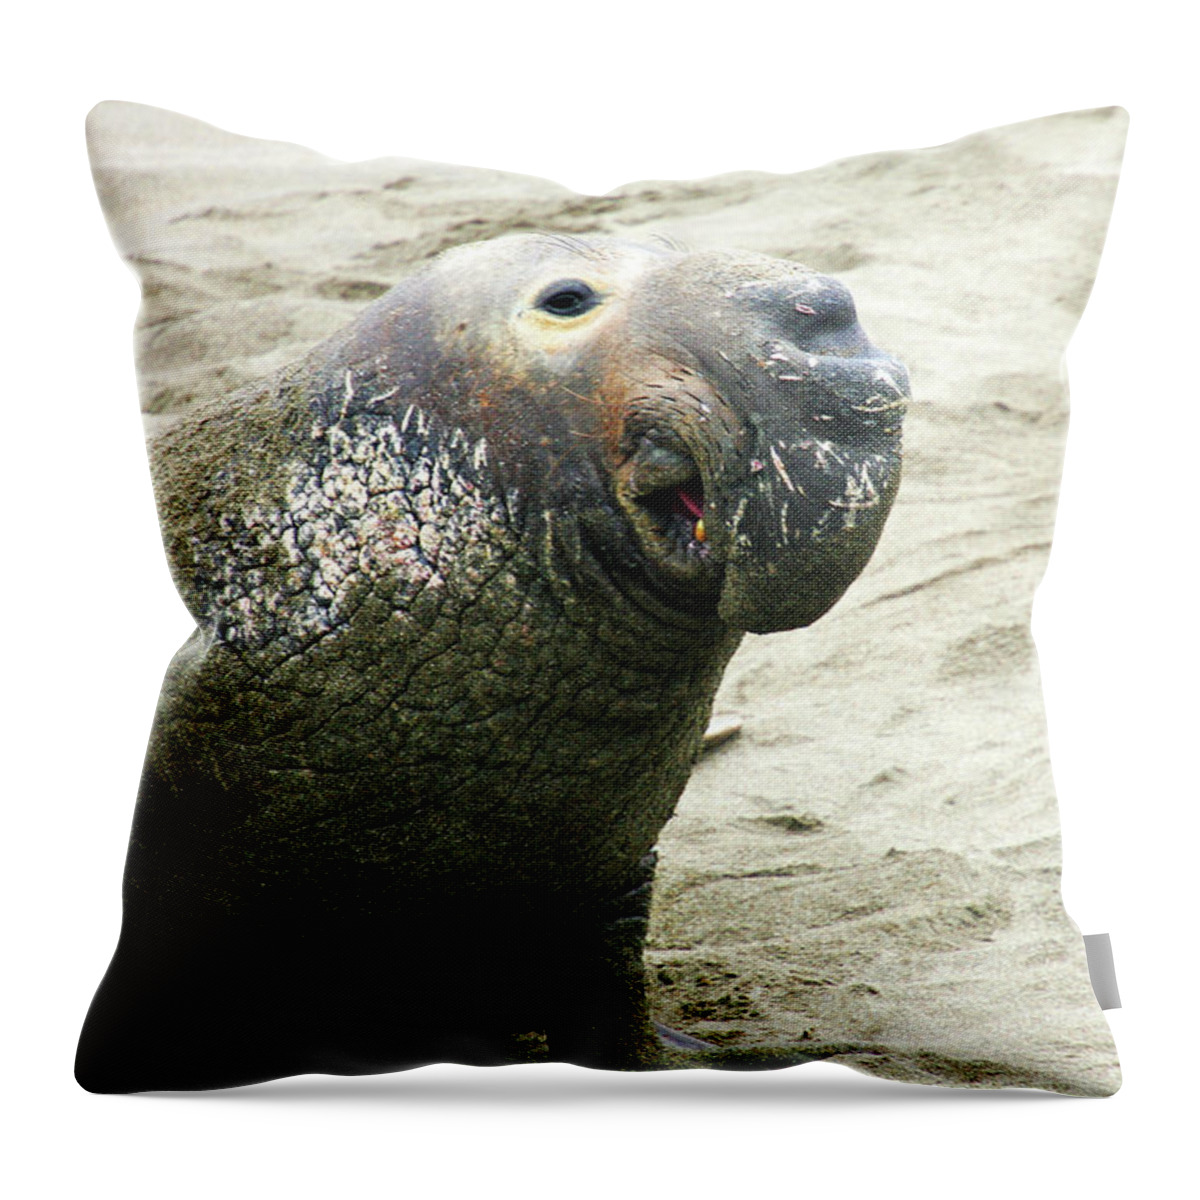 Elephant Seal Throw Pillow featuring the photograph Elephant Seal by Anthony Jones